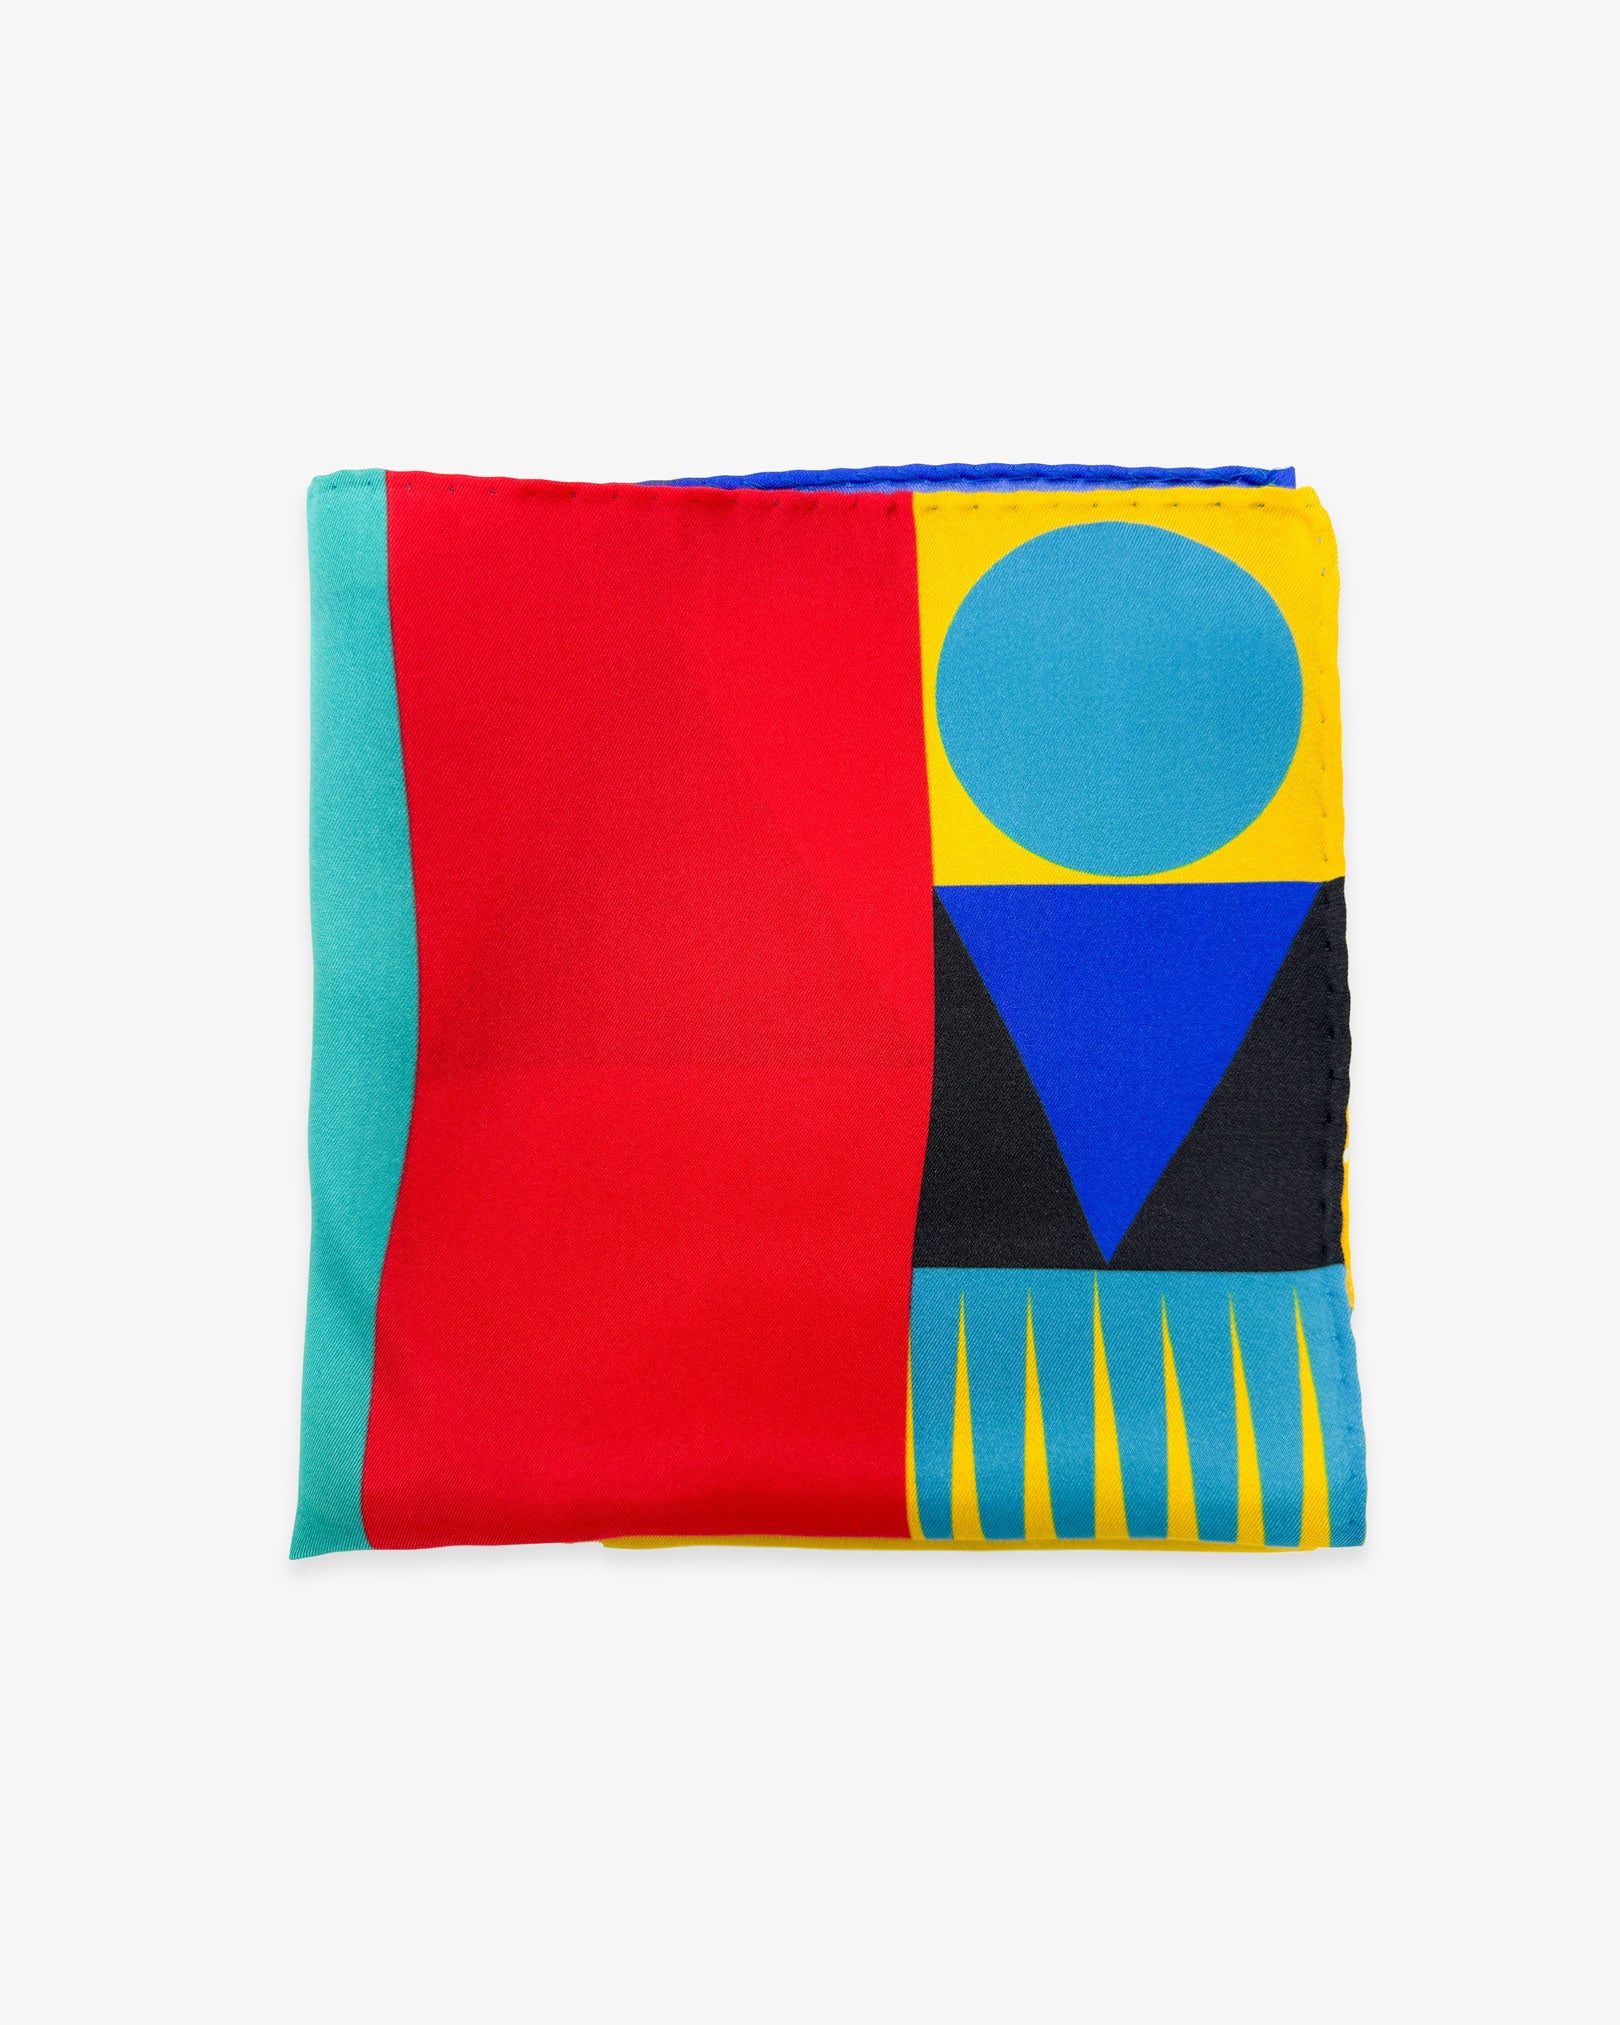 The 'Munich' silk pocket square from SOHO Scarves folded into a quarter, showing part of the multi-coloured pattern combining many familiar Bauhaus-inspired forms.